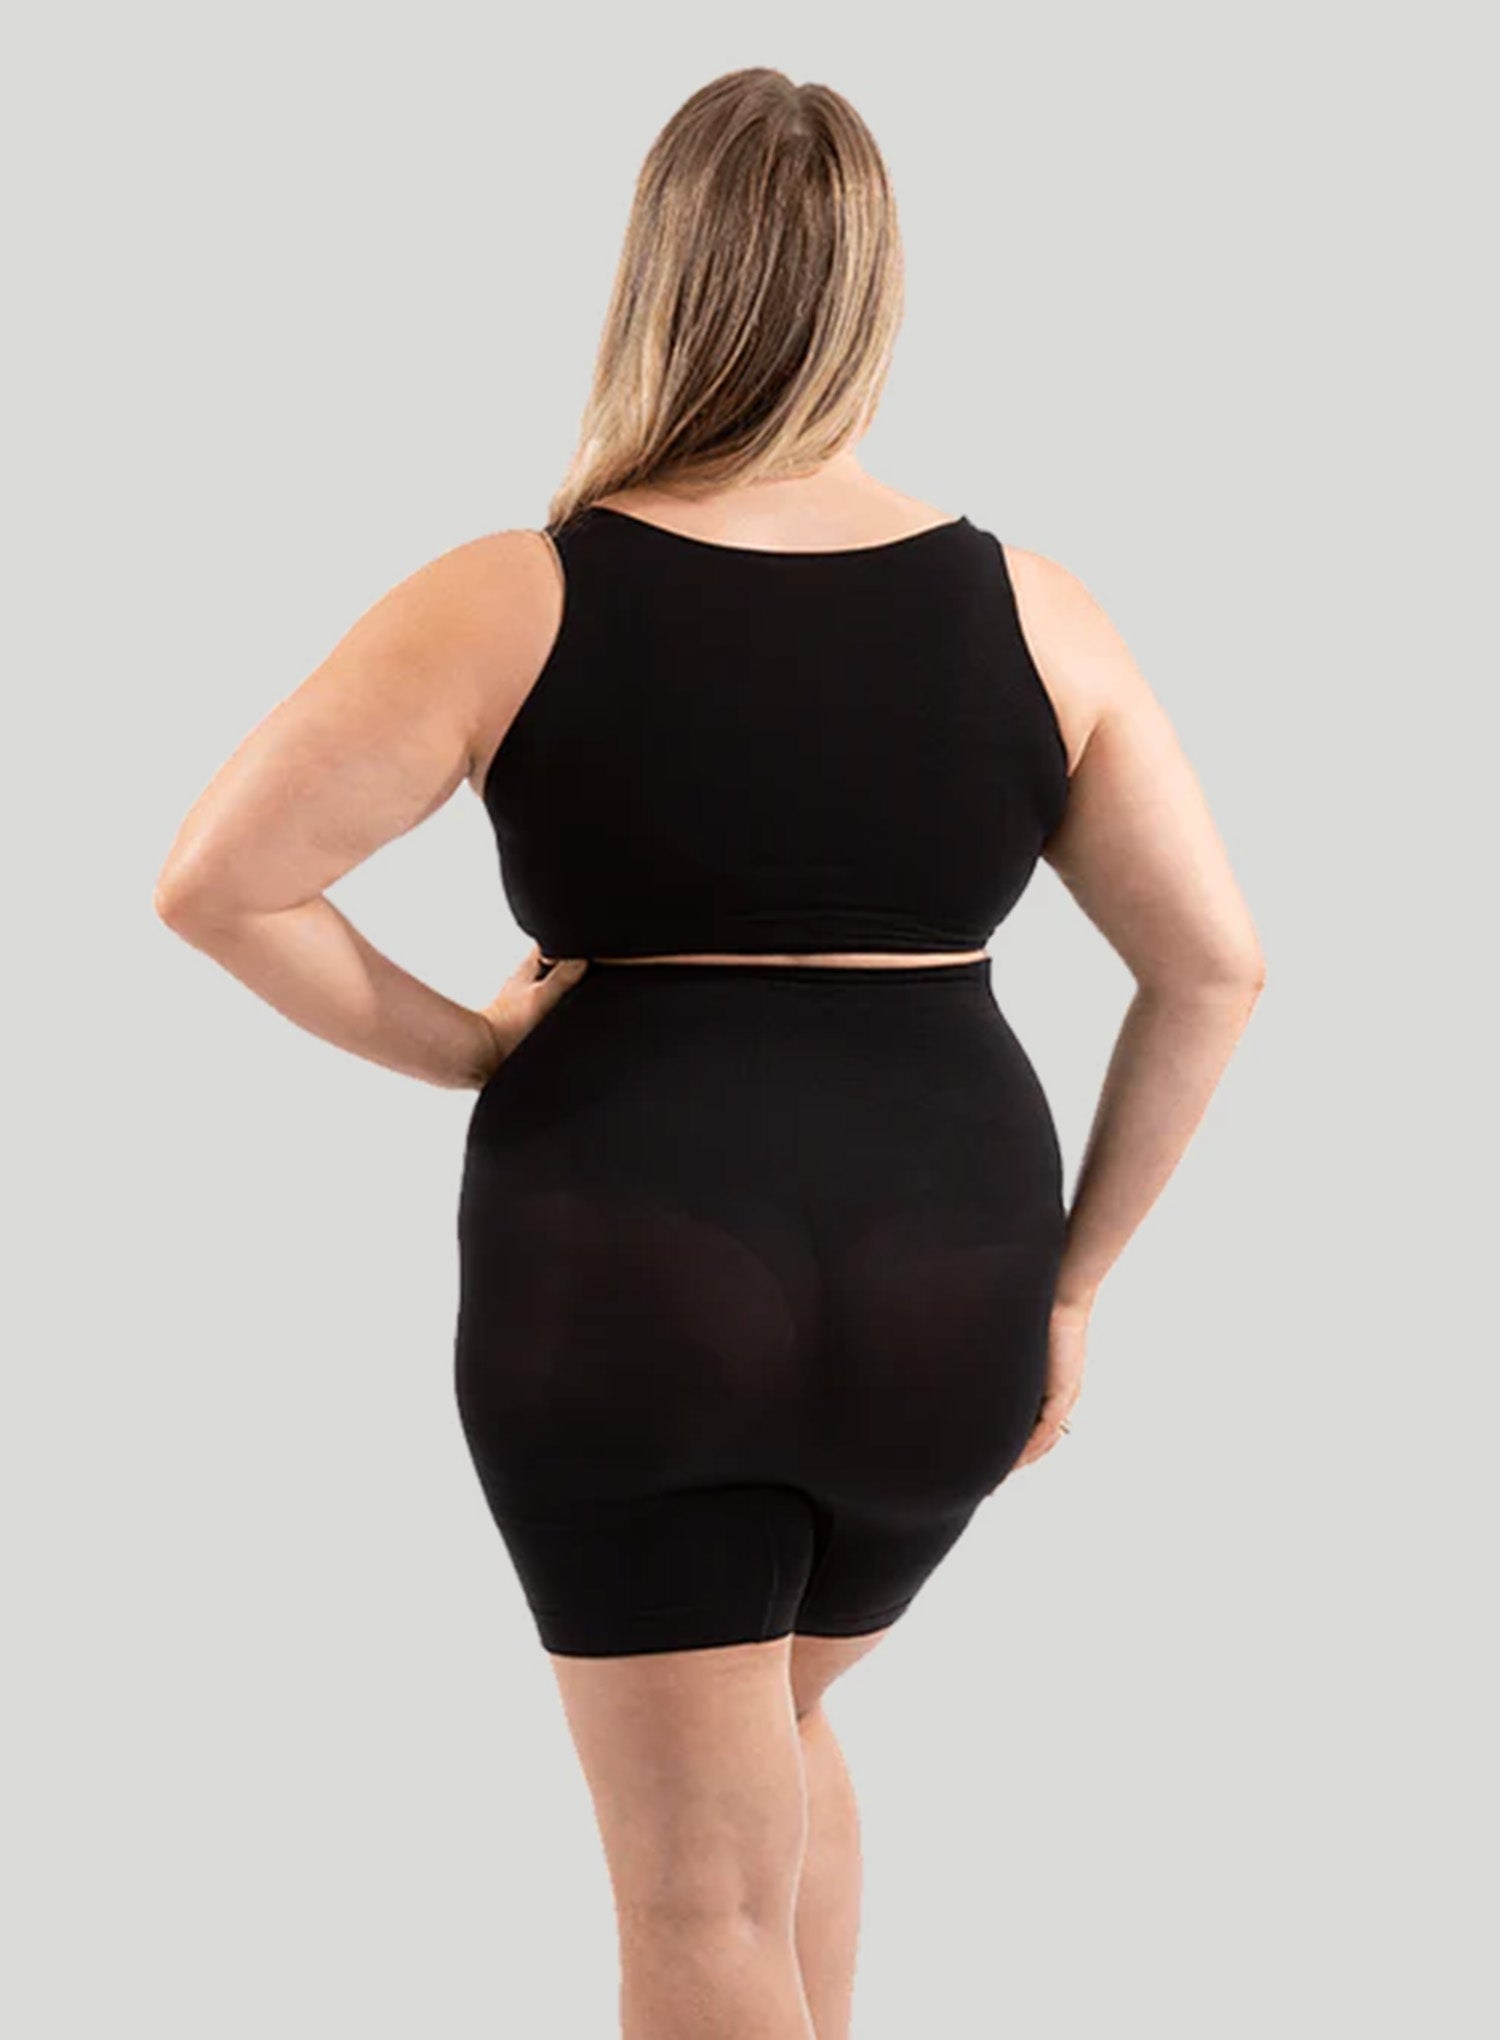 Plus Size Anti Chafing Shorts - Black - Size 14 to 24, Sonsee Woman